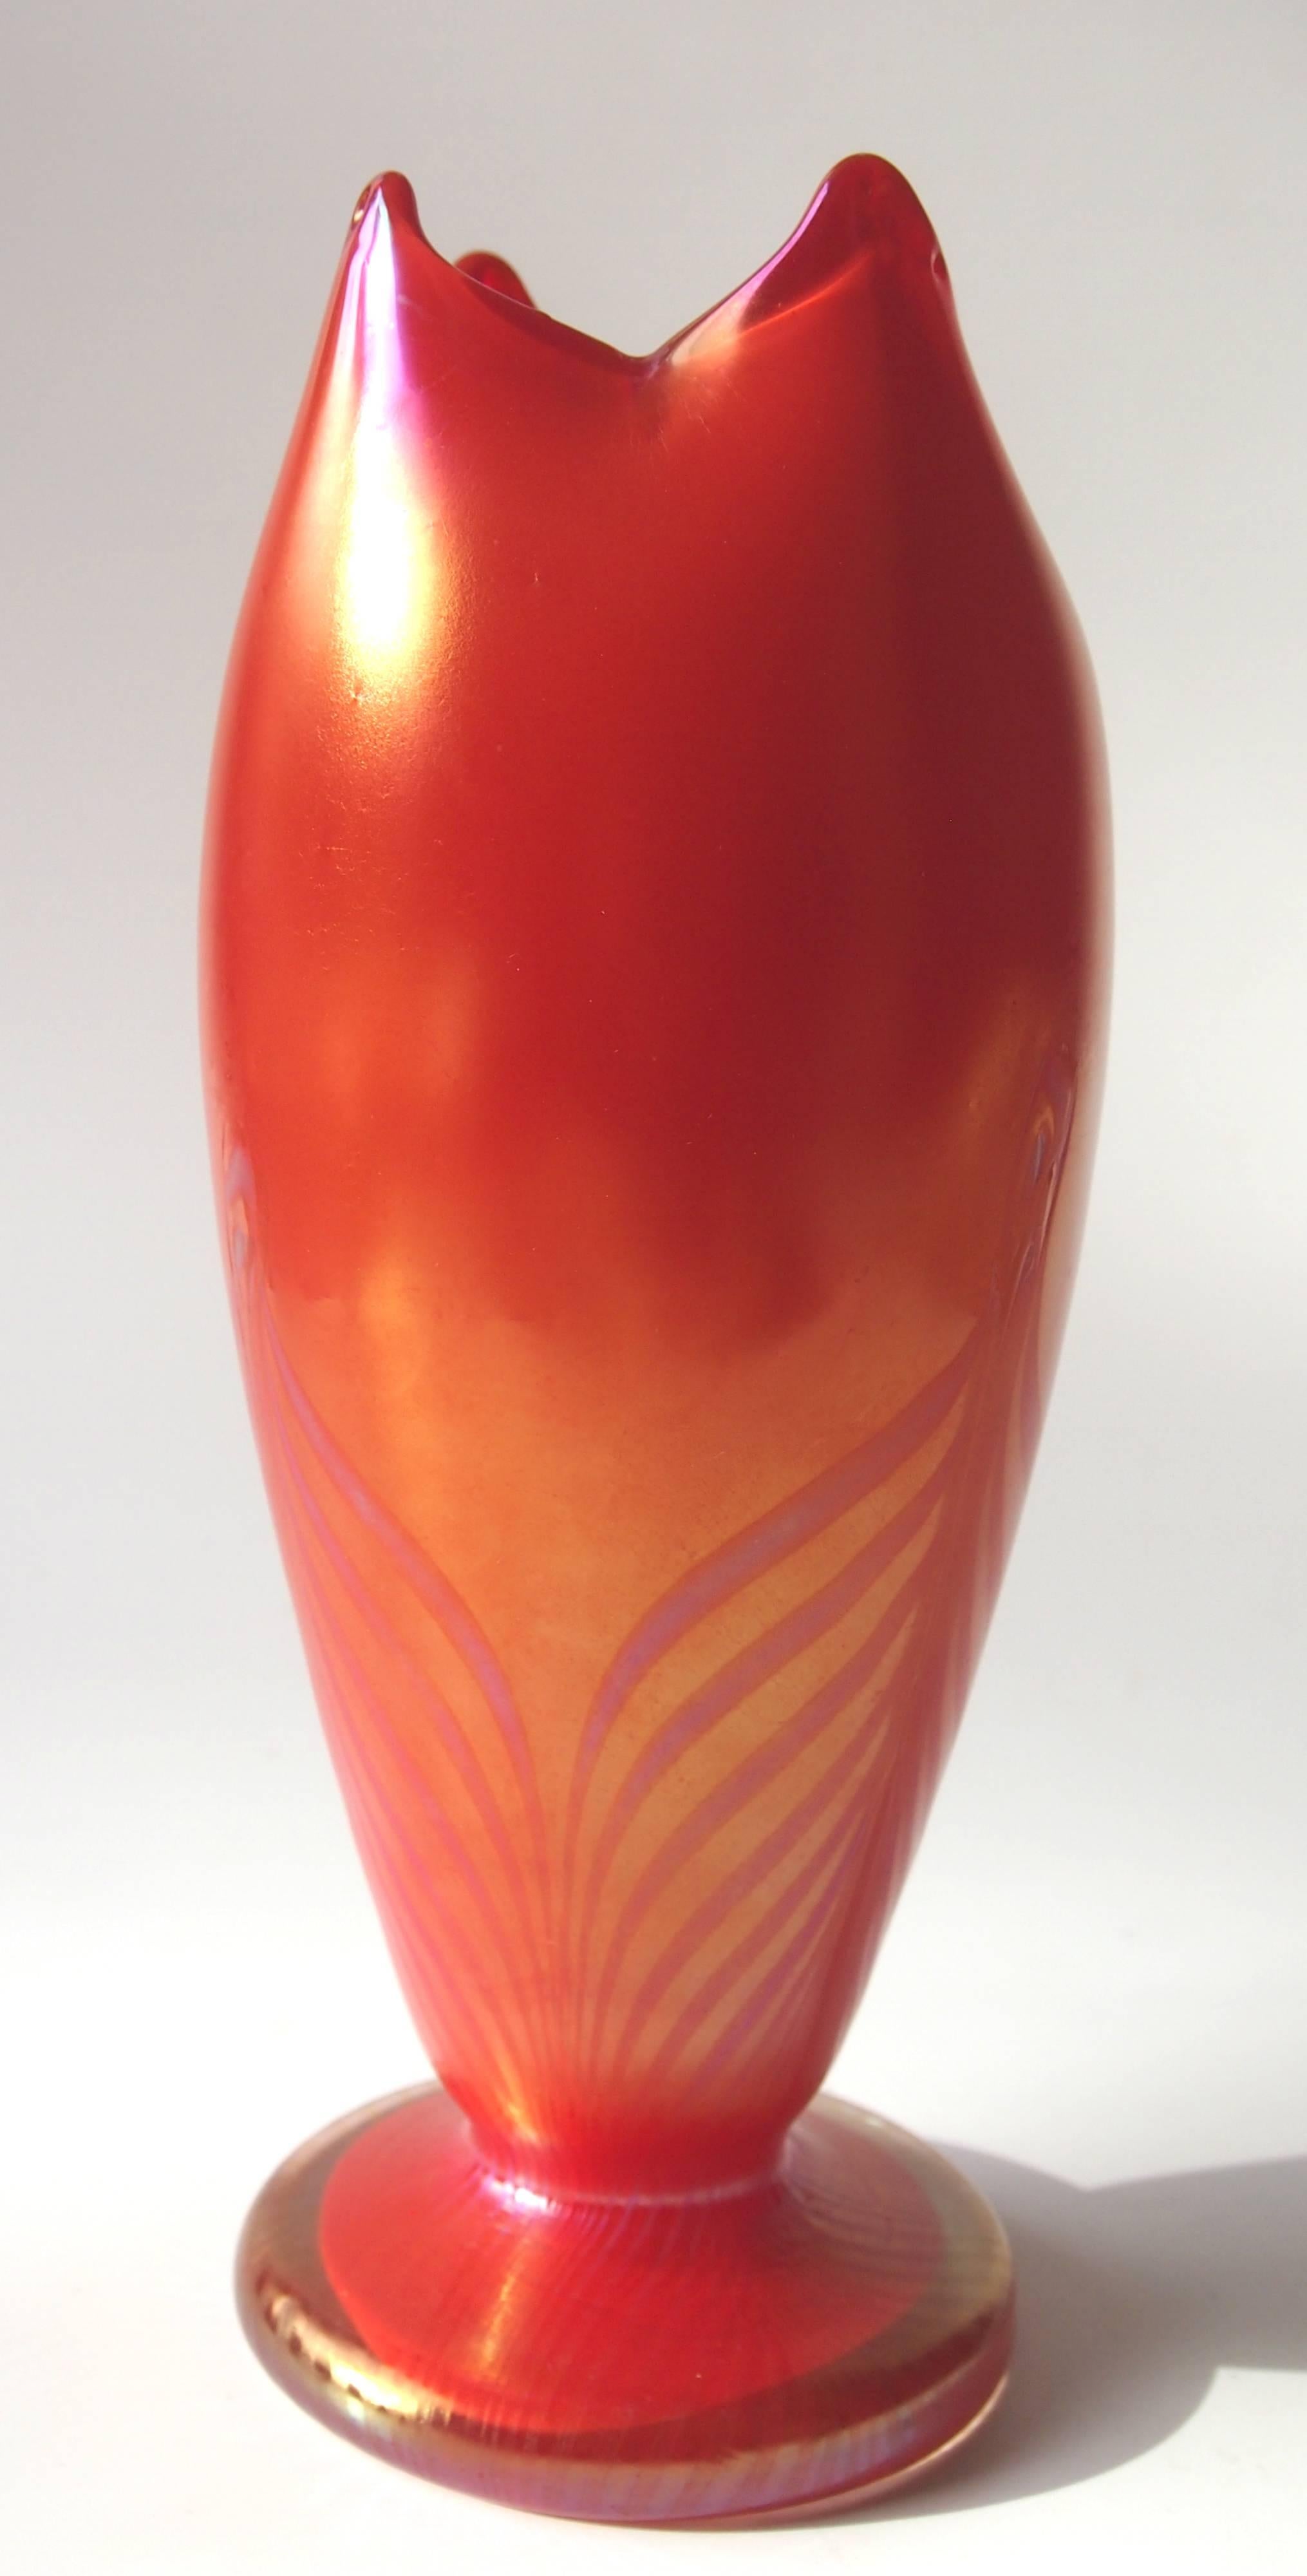 Stunning and very rare red pulled and feathered vase. The vase has vibrant color and subtle feathering superbly executed with four hot pulled points. There is a similar example in the Kralik room at the great glass museum in Passau.

Kralik was at